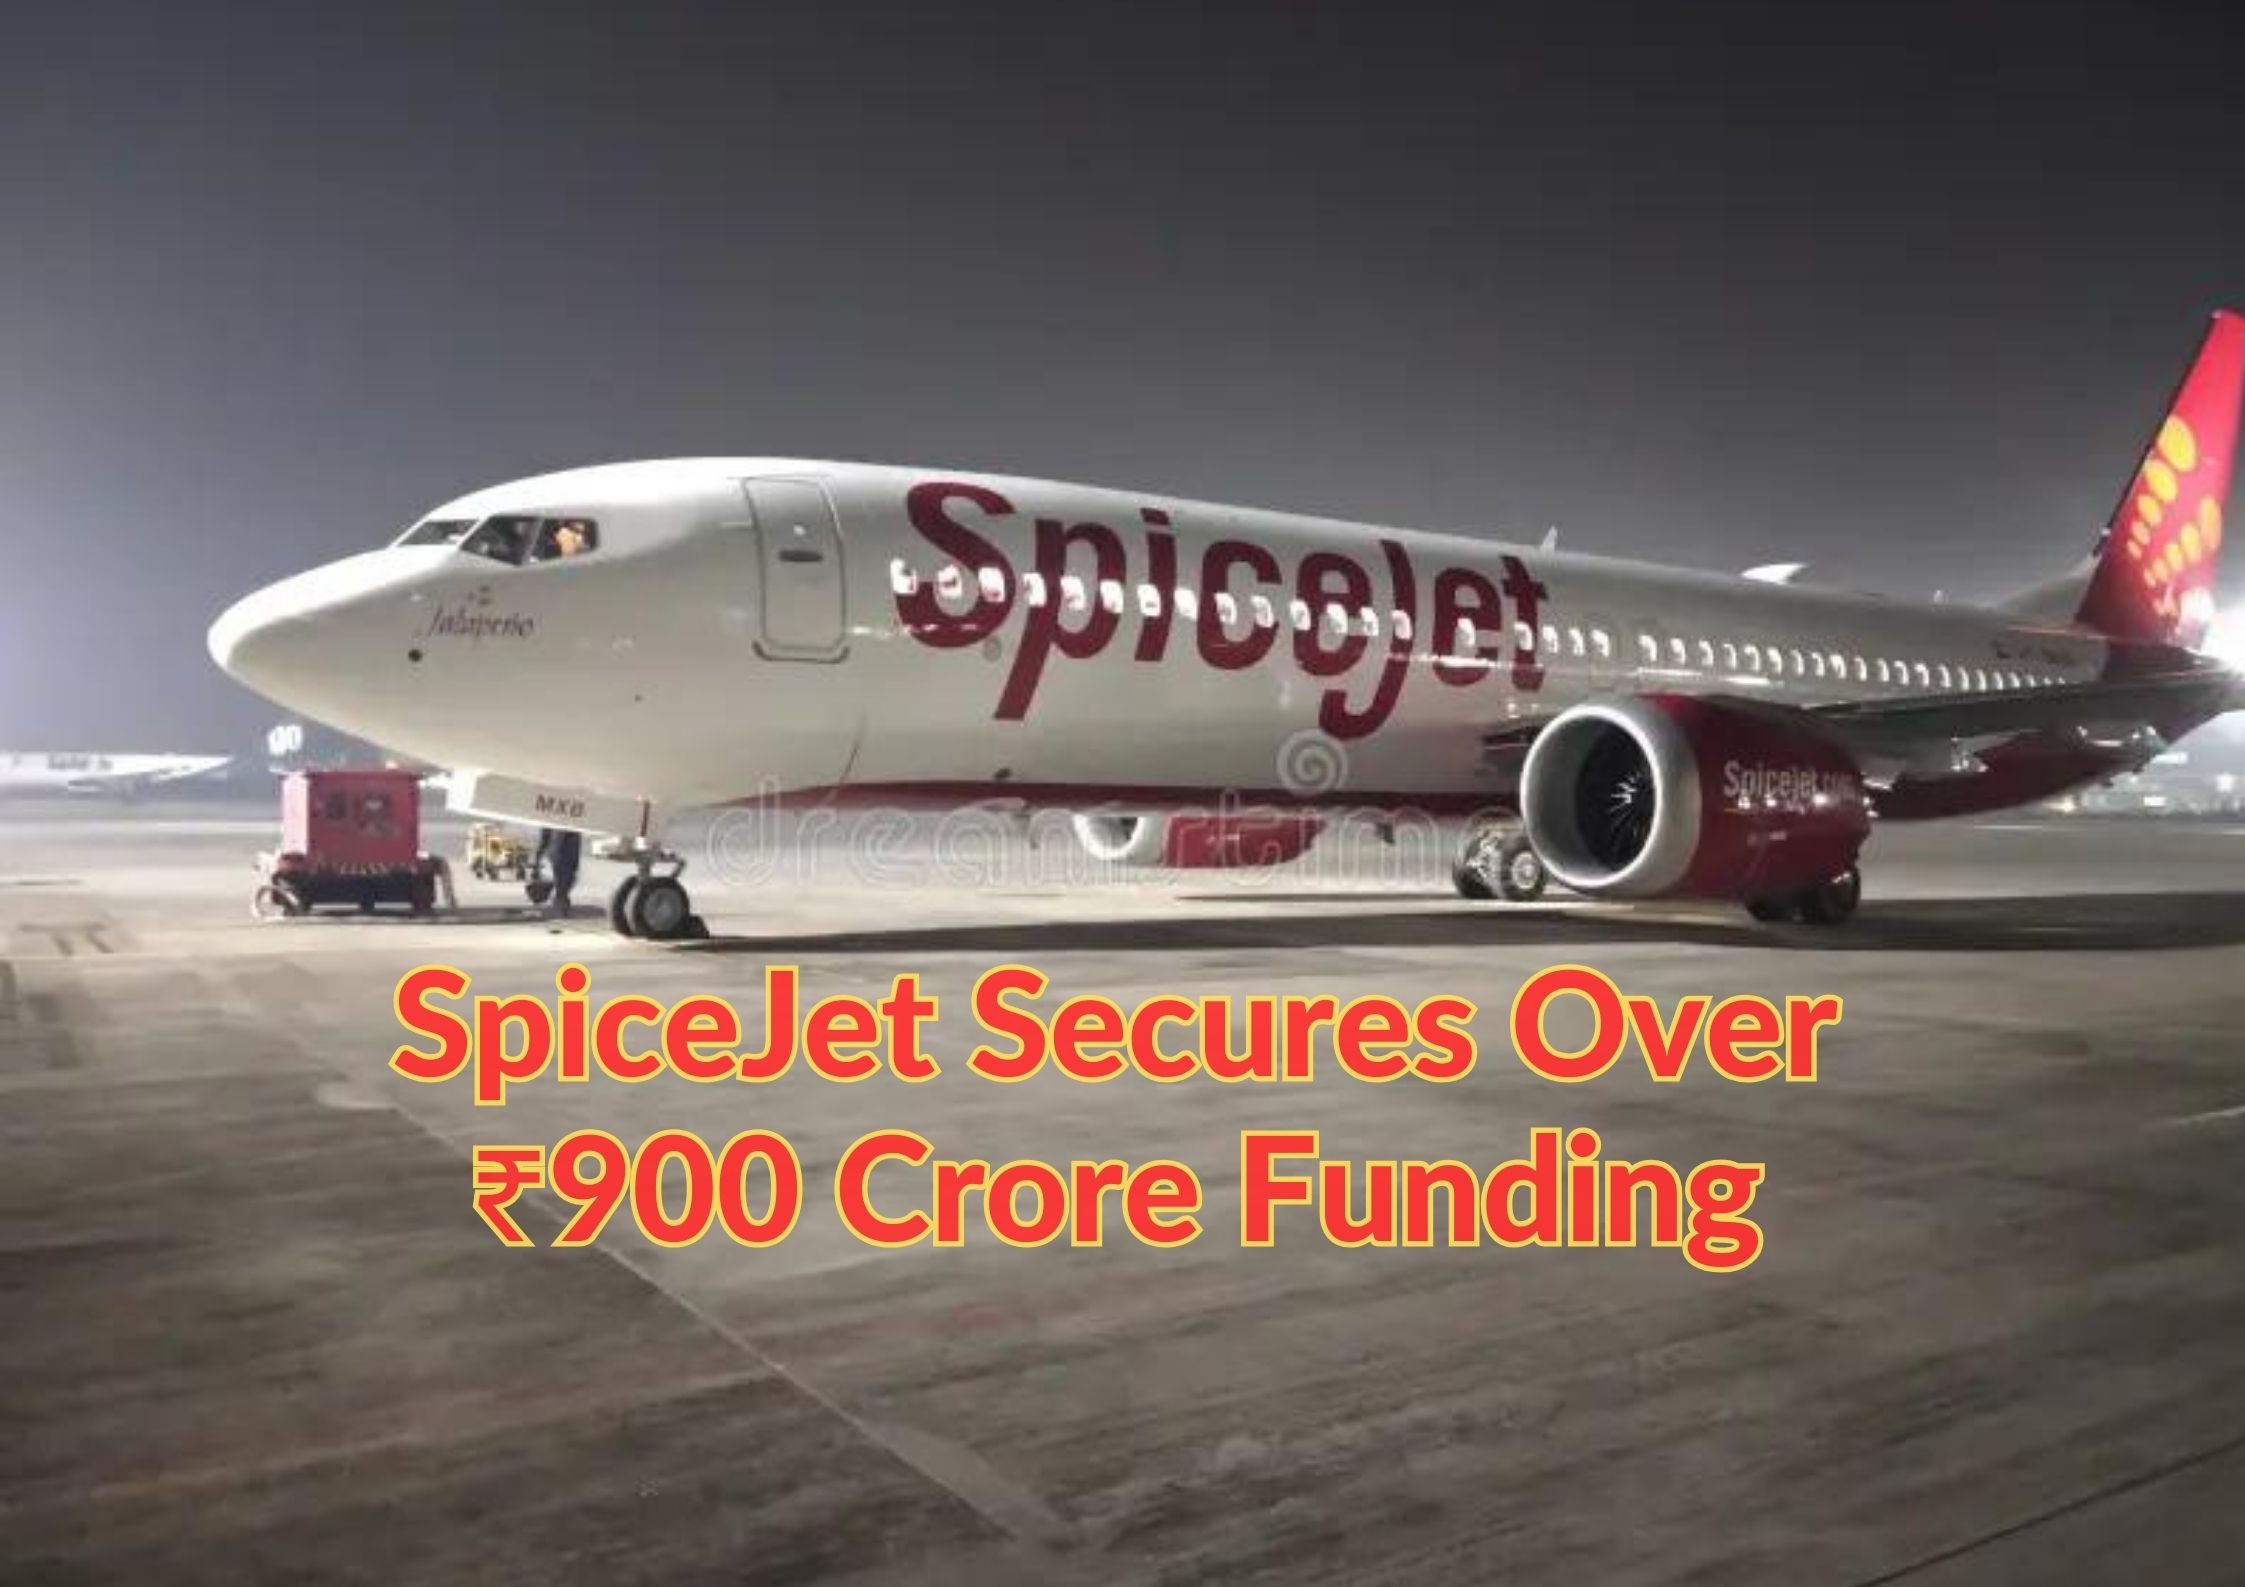 SpiceJet Secures Over ₹900 Crore Funding